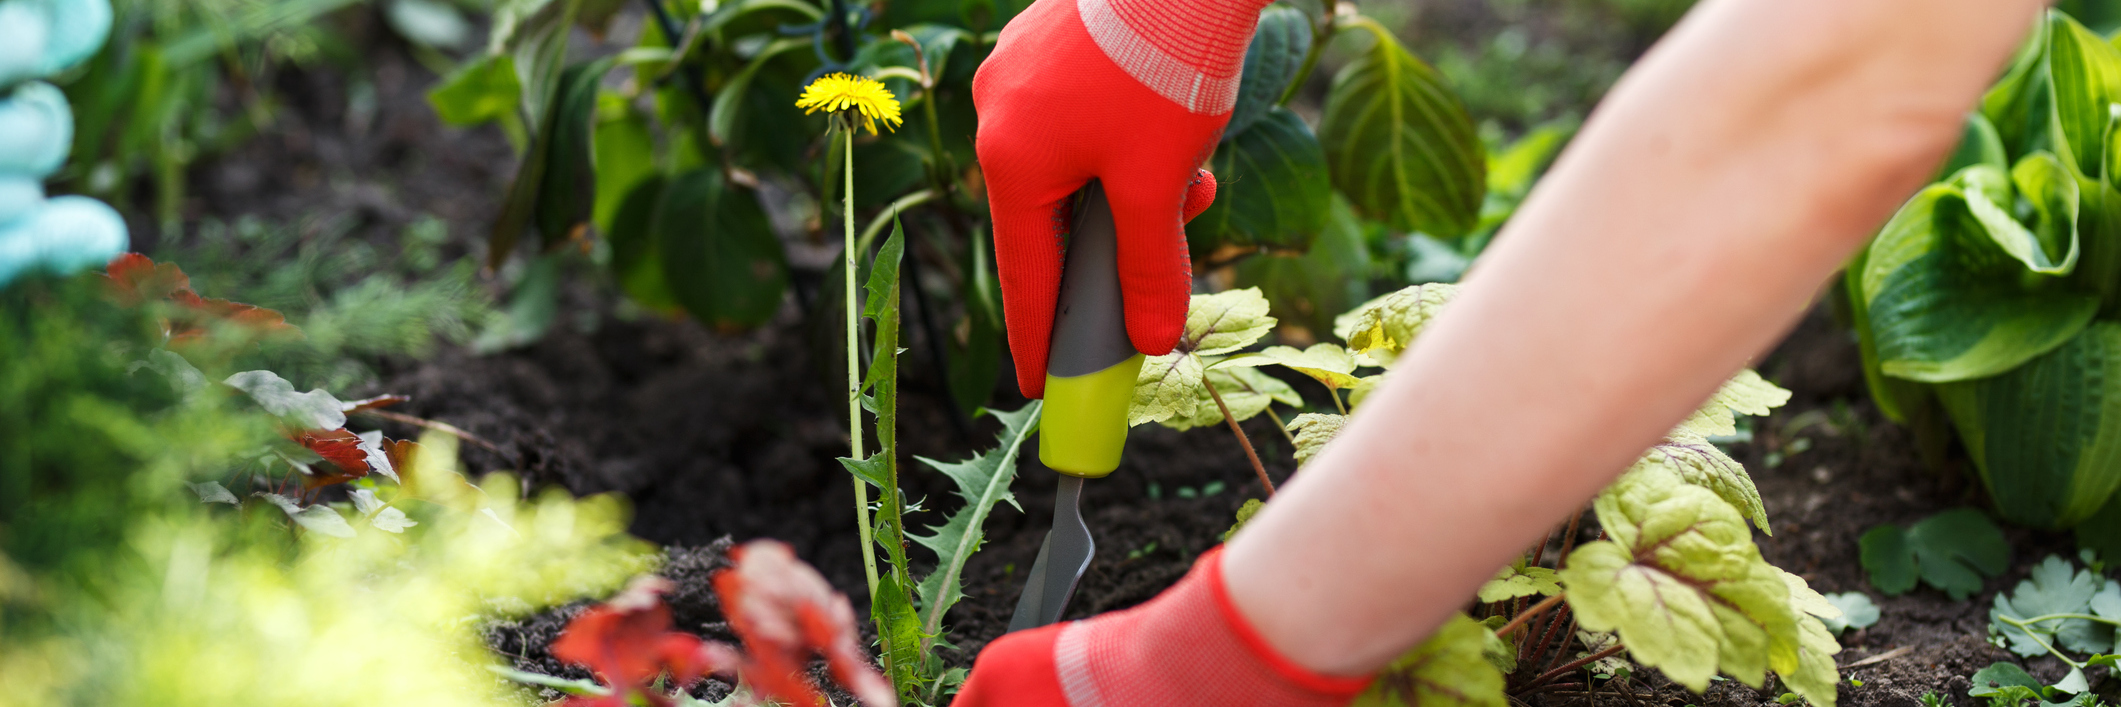 woman's hands holding gardening tools removing weed from soil